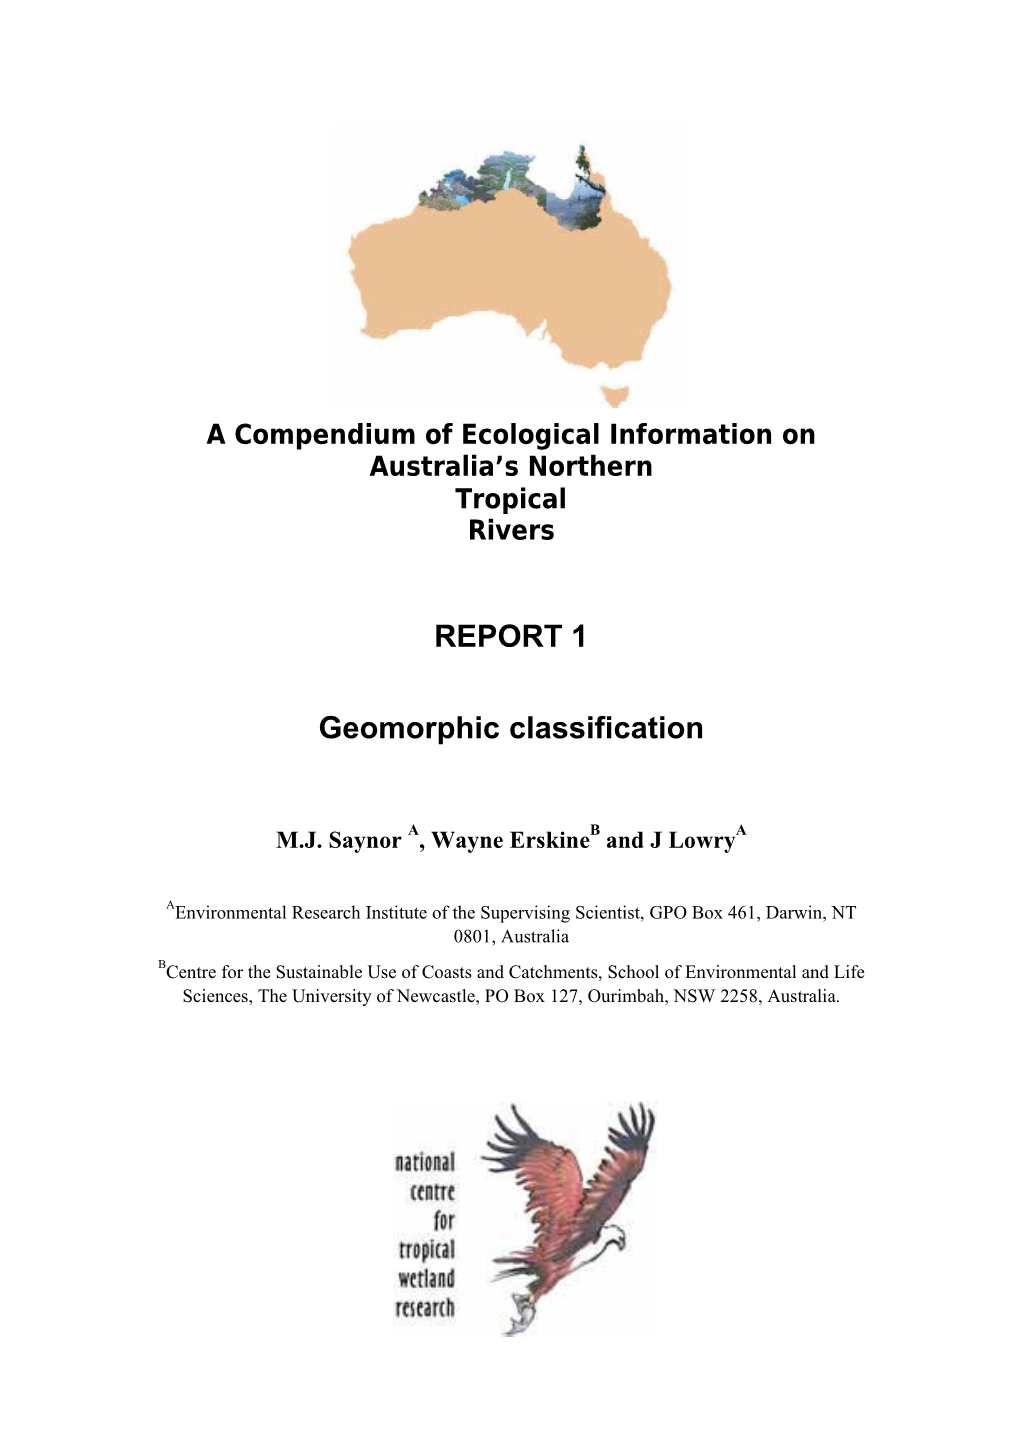 A Compendium of Ecological Information on Australia's Northern Tropical Rivers - Report